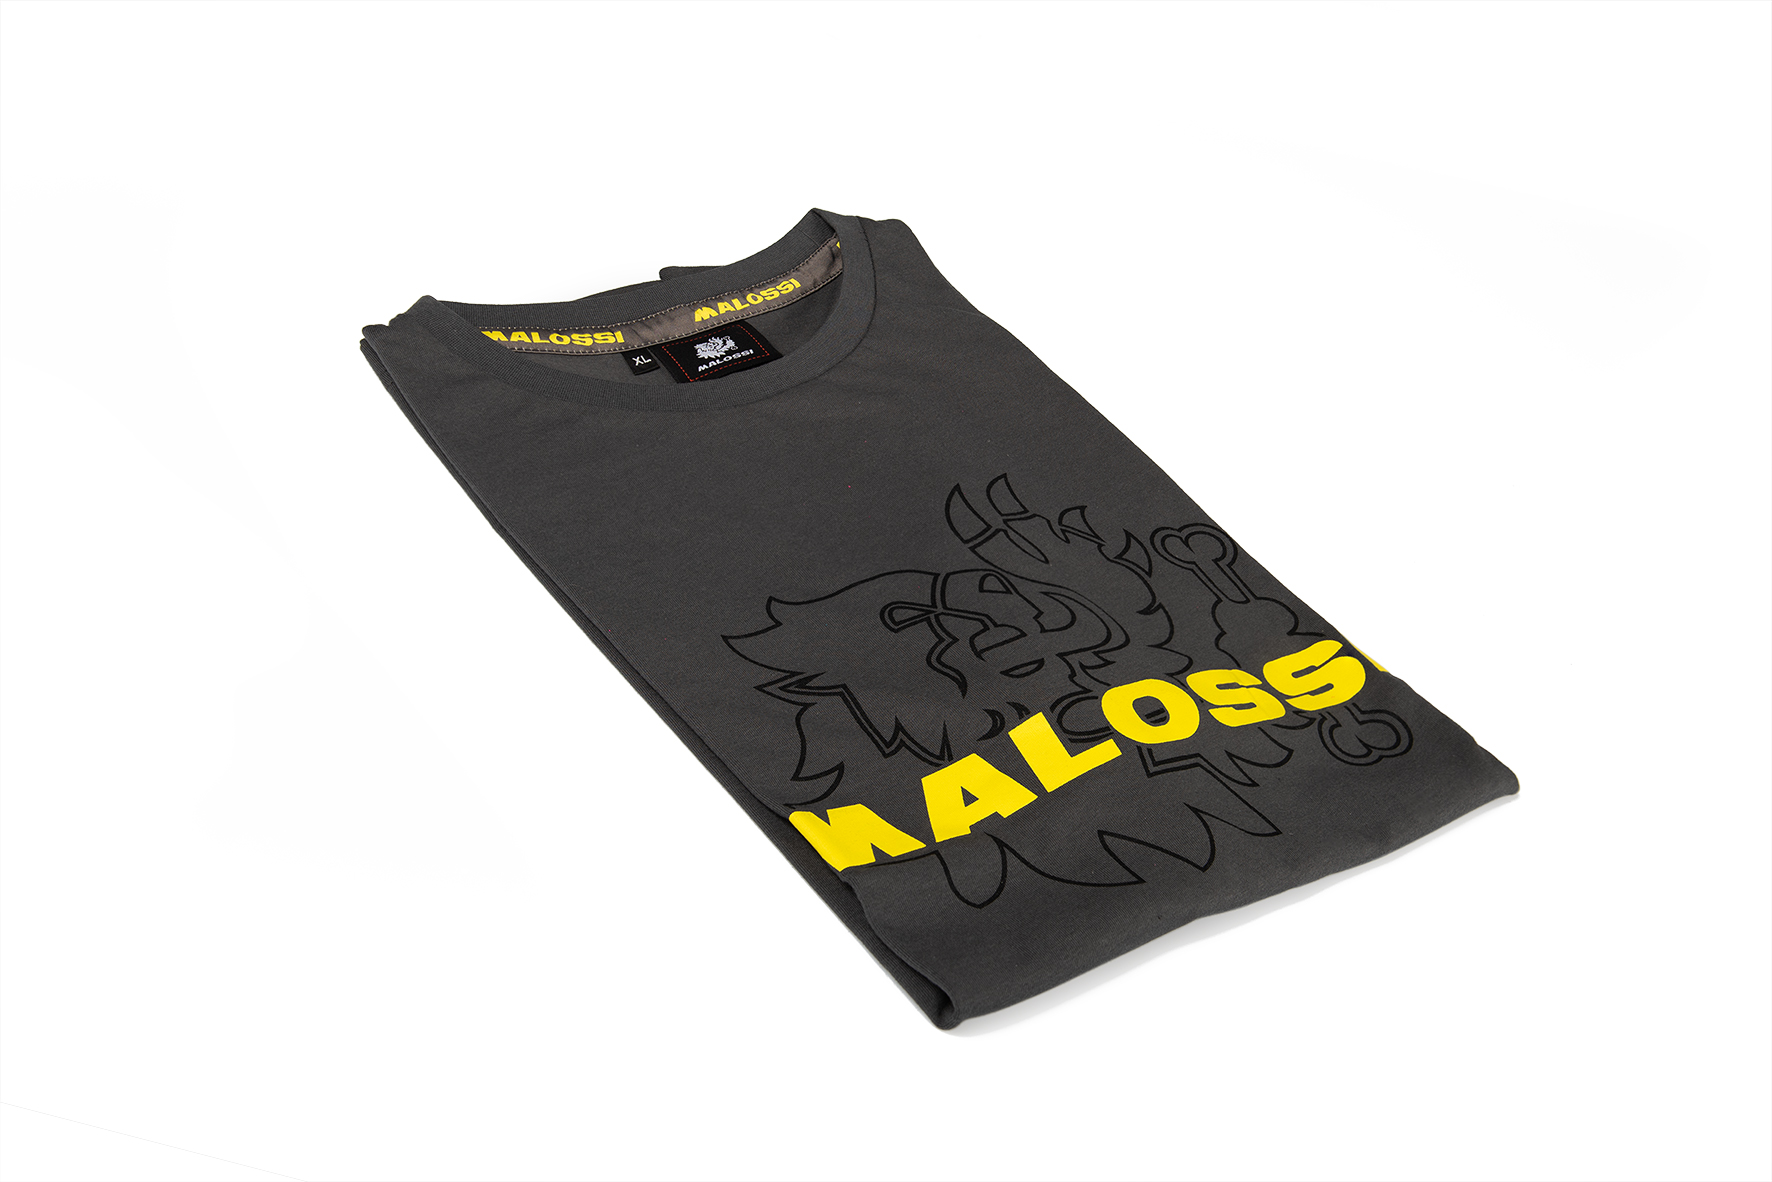 Charcoal grey T-shirt with Malossi fluo logo - size S